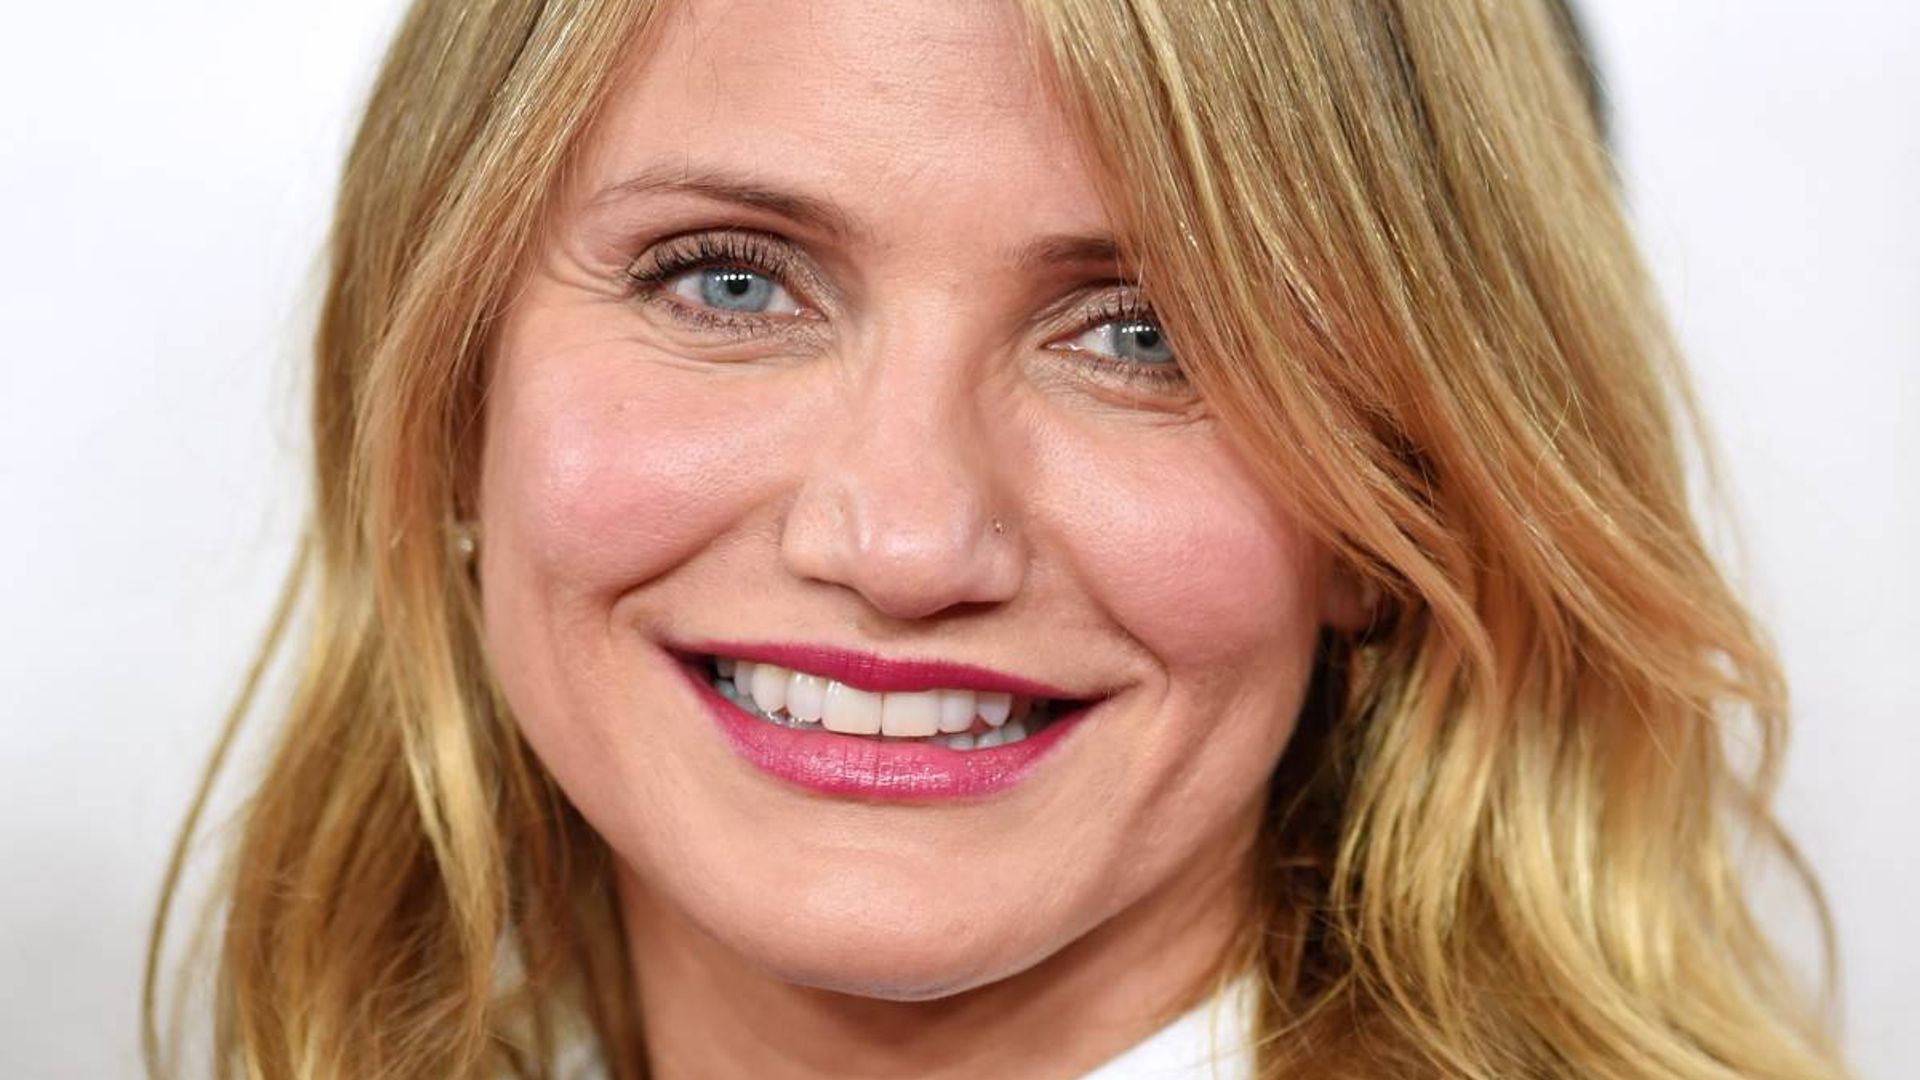 Cameron Diaz on being a mom to Raddix: The sweet things she's said about motherhood